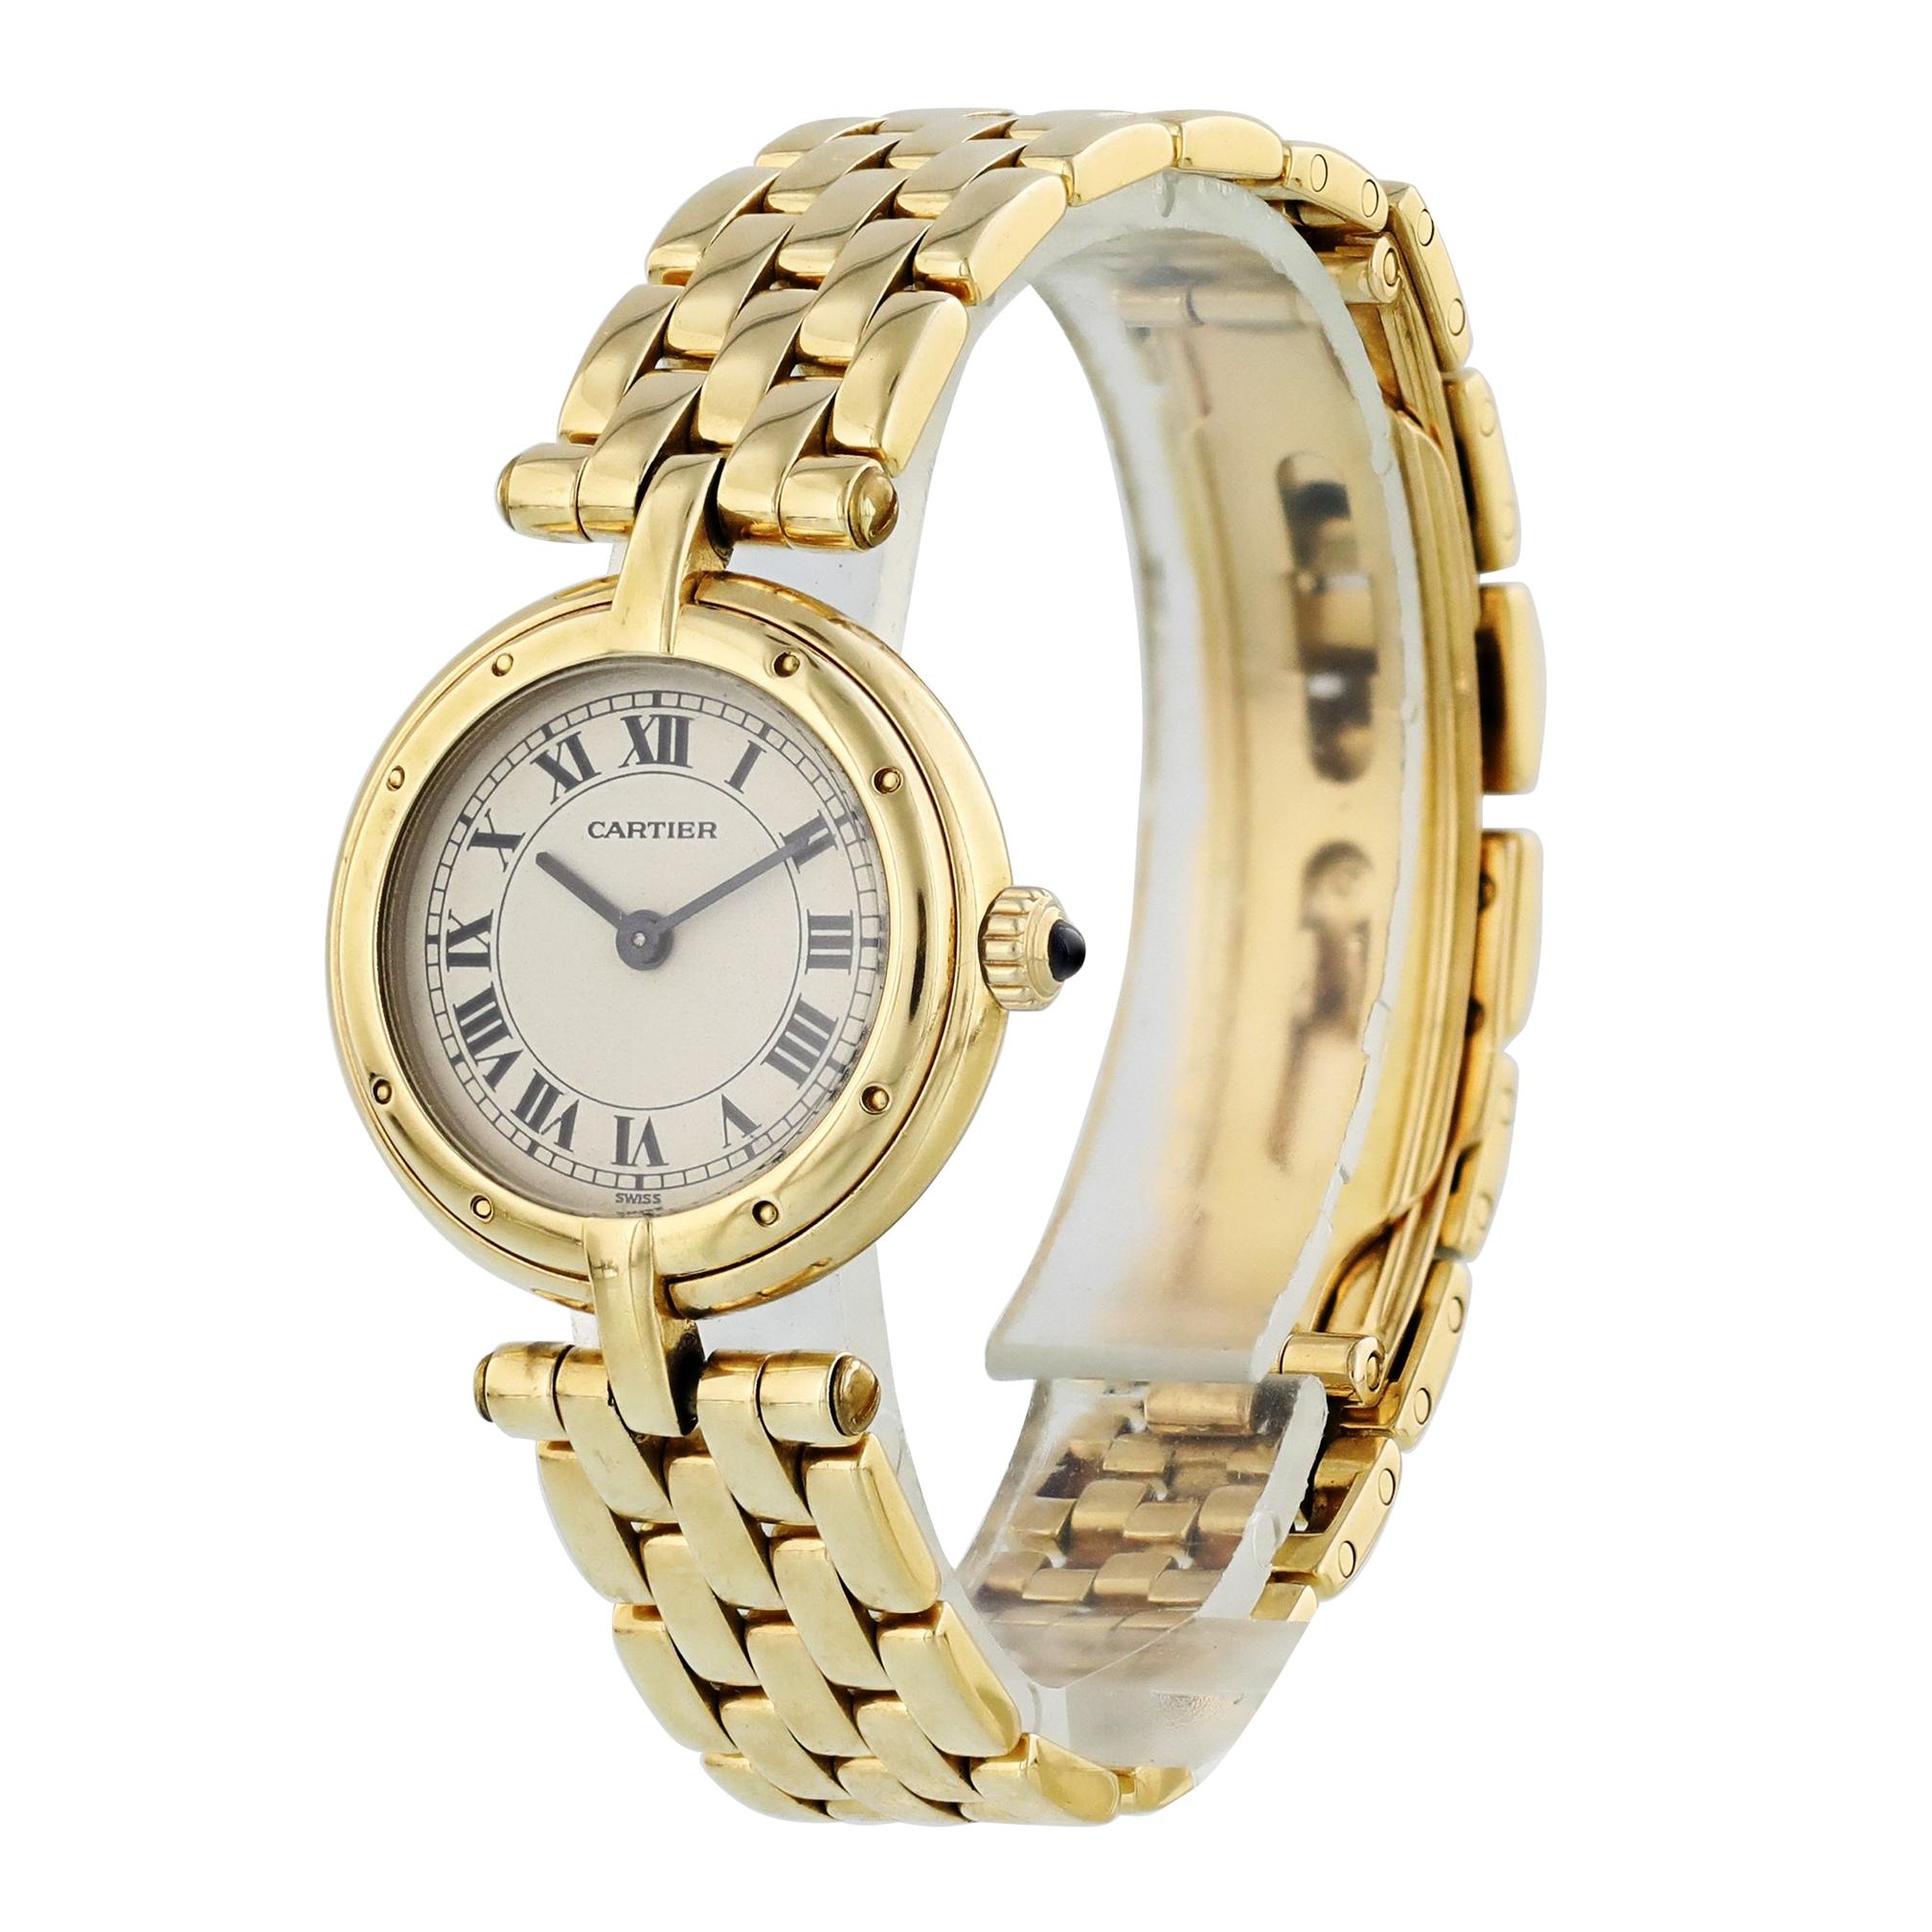 Cartier cougar Panthere Yellow Gold Ladies Watch. 
24mm 18k Yellow gold case. 
Yellow Gold smooth bezel. 
Off-White dial with Blue steel hands and Roman numeral hour markers. 
Minute markers on the outer dial. 
Yellow Gold Bracelet with Butterfly